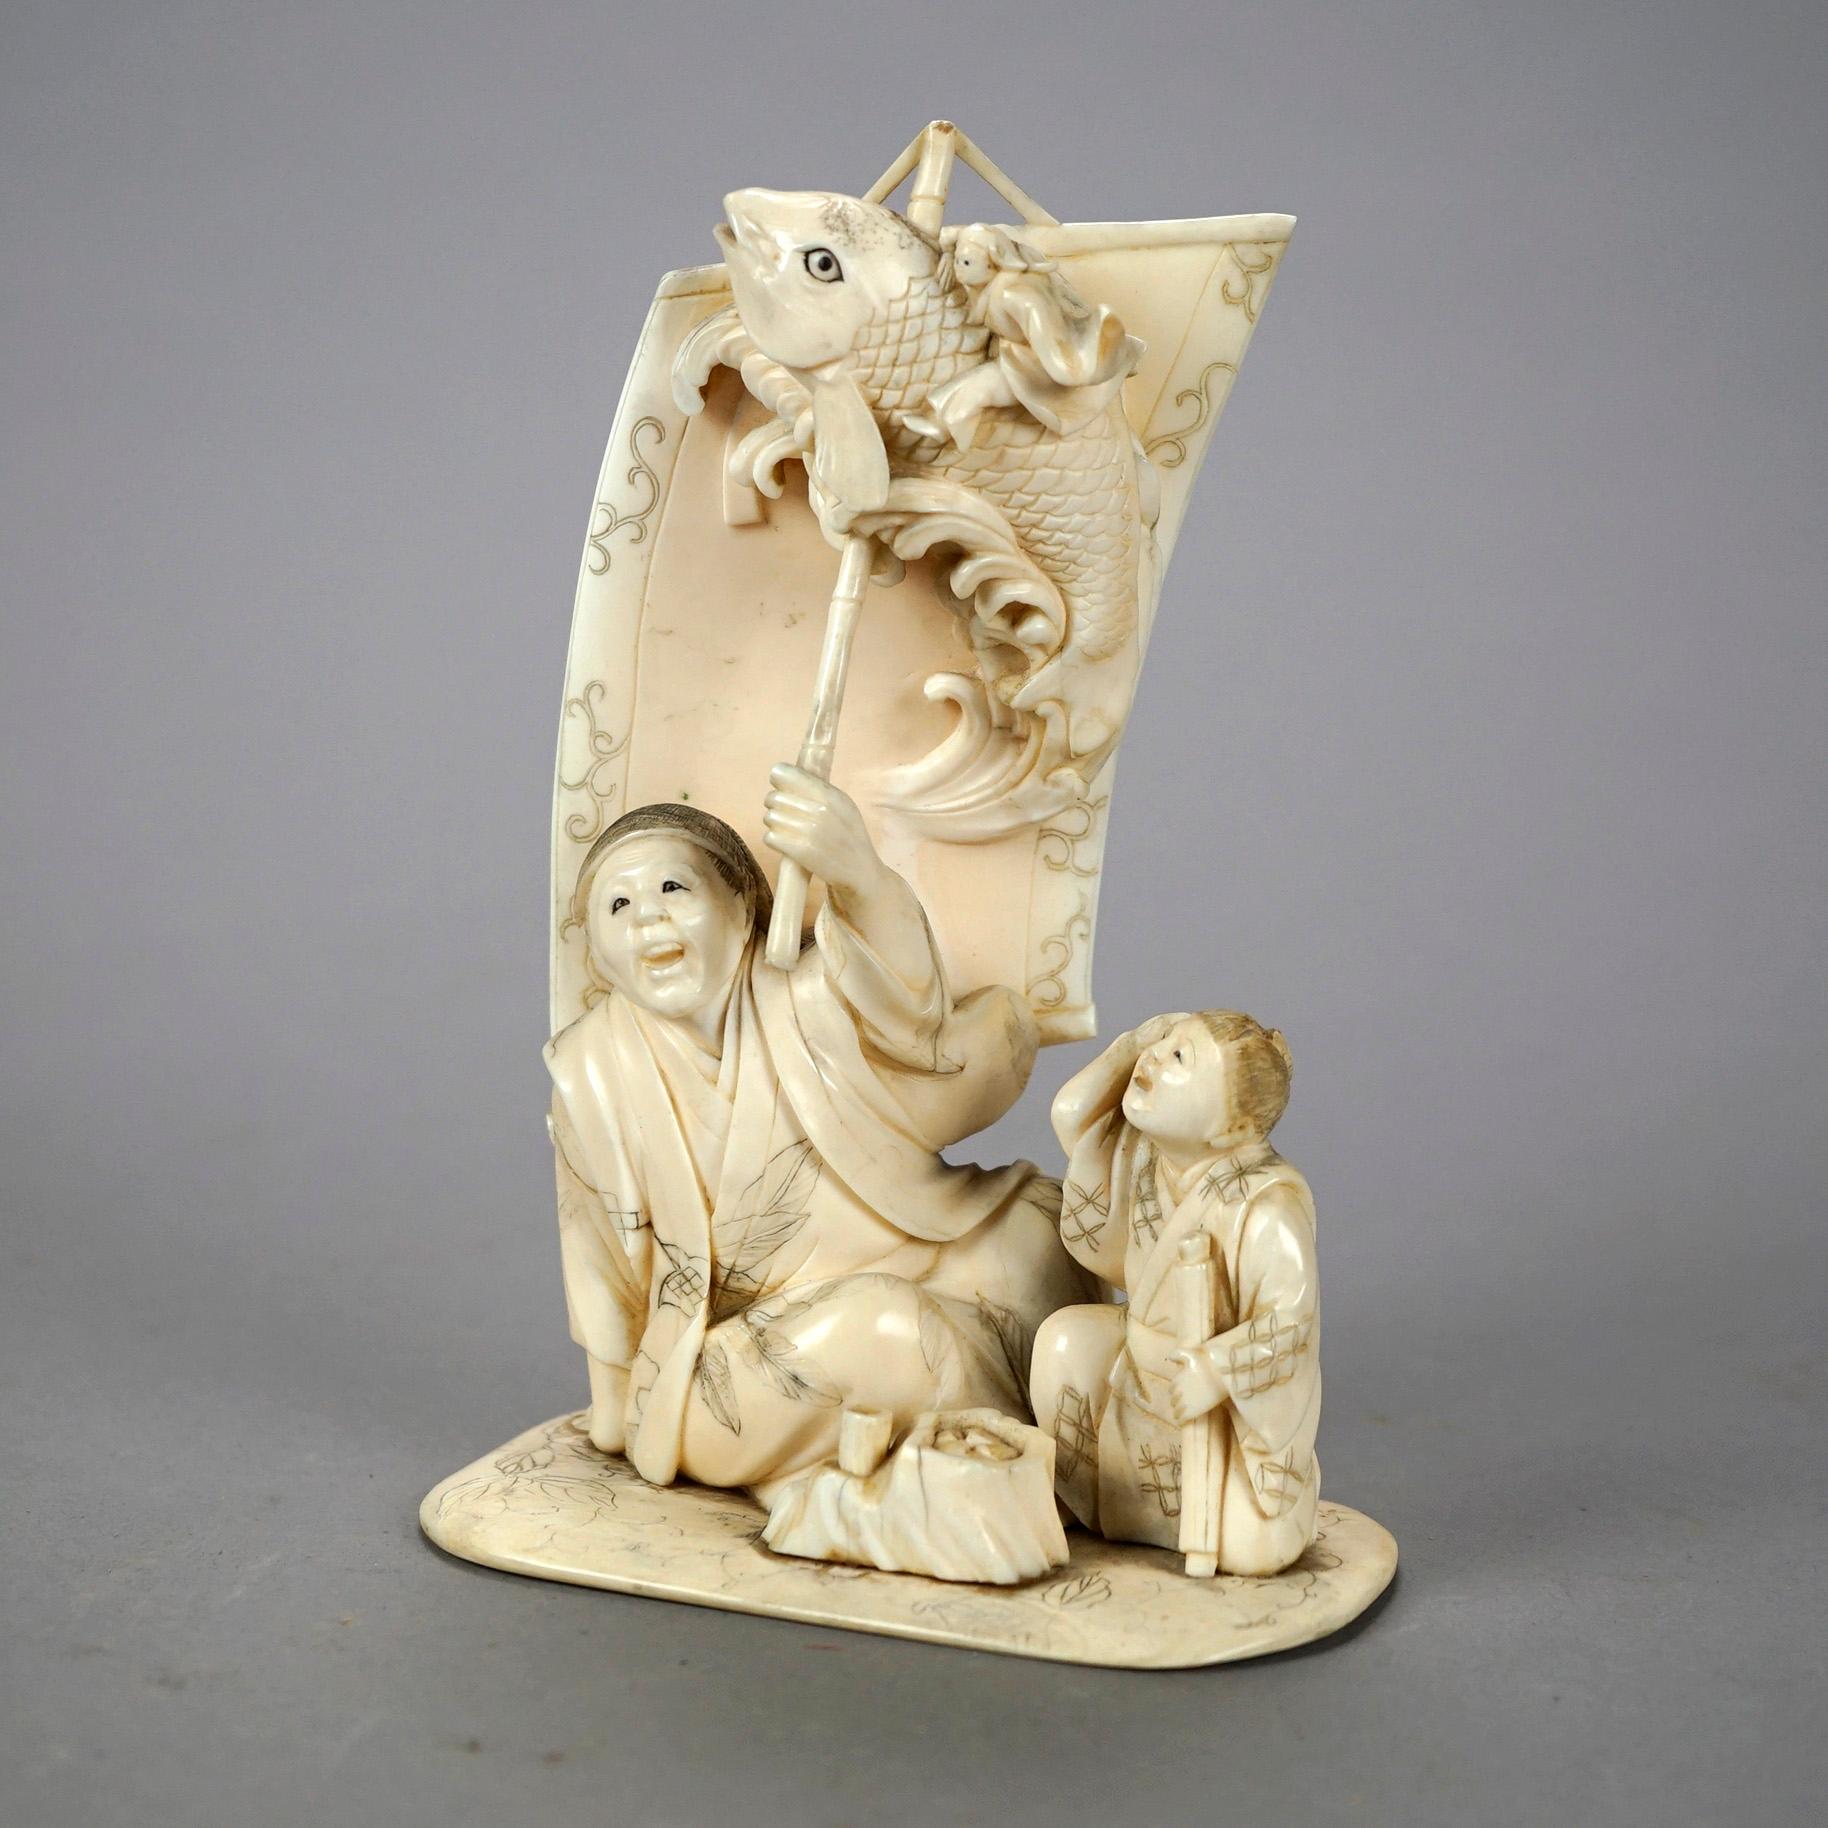 An antique Chinese figural group offers carved bone depiction of a man telling a small boy a tale of riding a fish, signed on base as photographed, 20th century

Measures- 6.25''H x 4.5''W x 2.5''D.